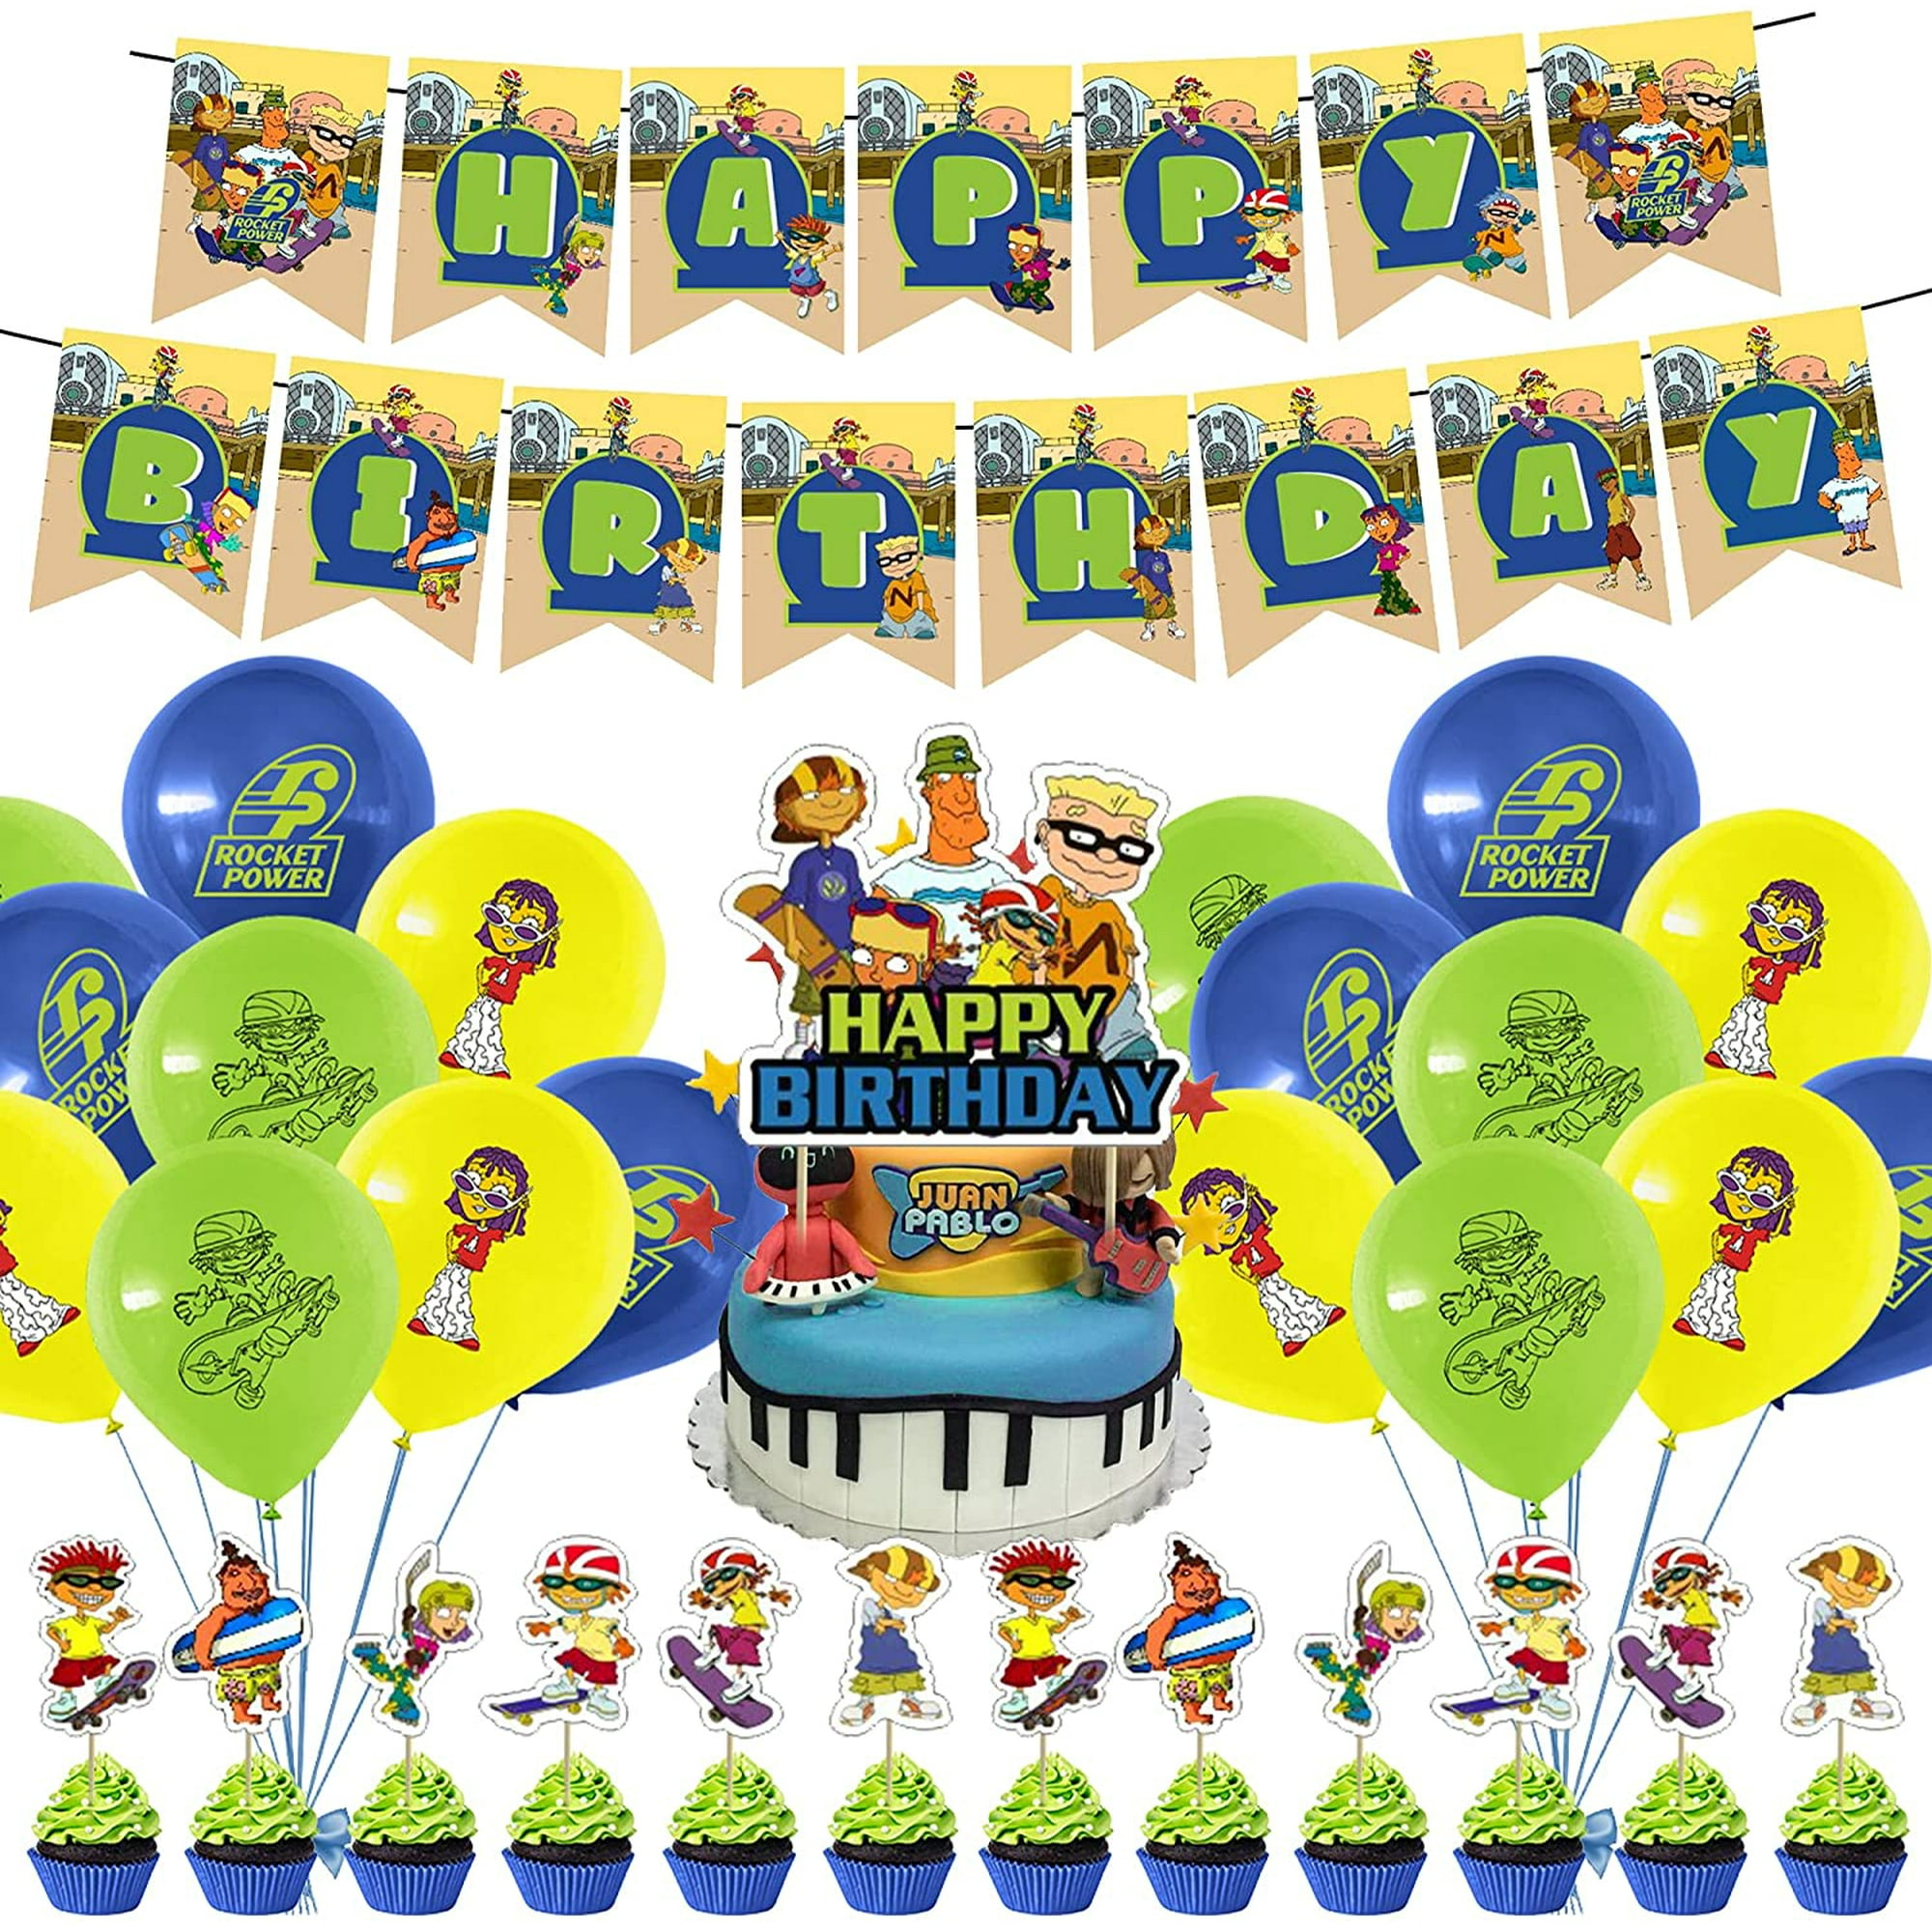 Rocket Power Party Decorations Set, Anime Cartoon Theme Birthday Supplies  Rocket Power Stickers Banner Balloons for Rocket Power Fans Party Supplies  Decor | Walmart Canada